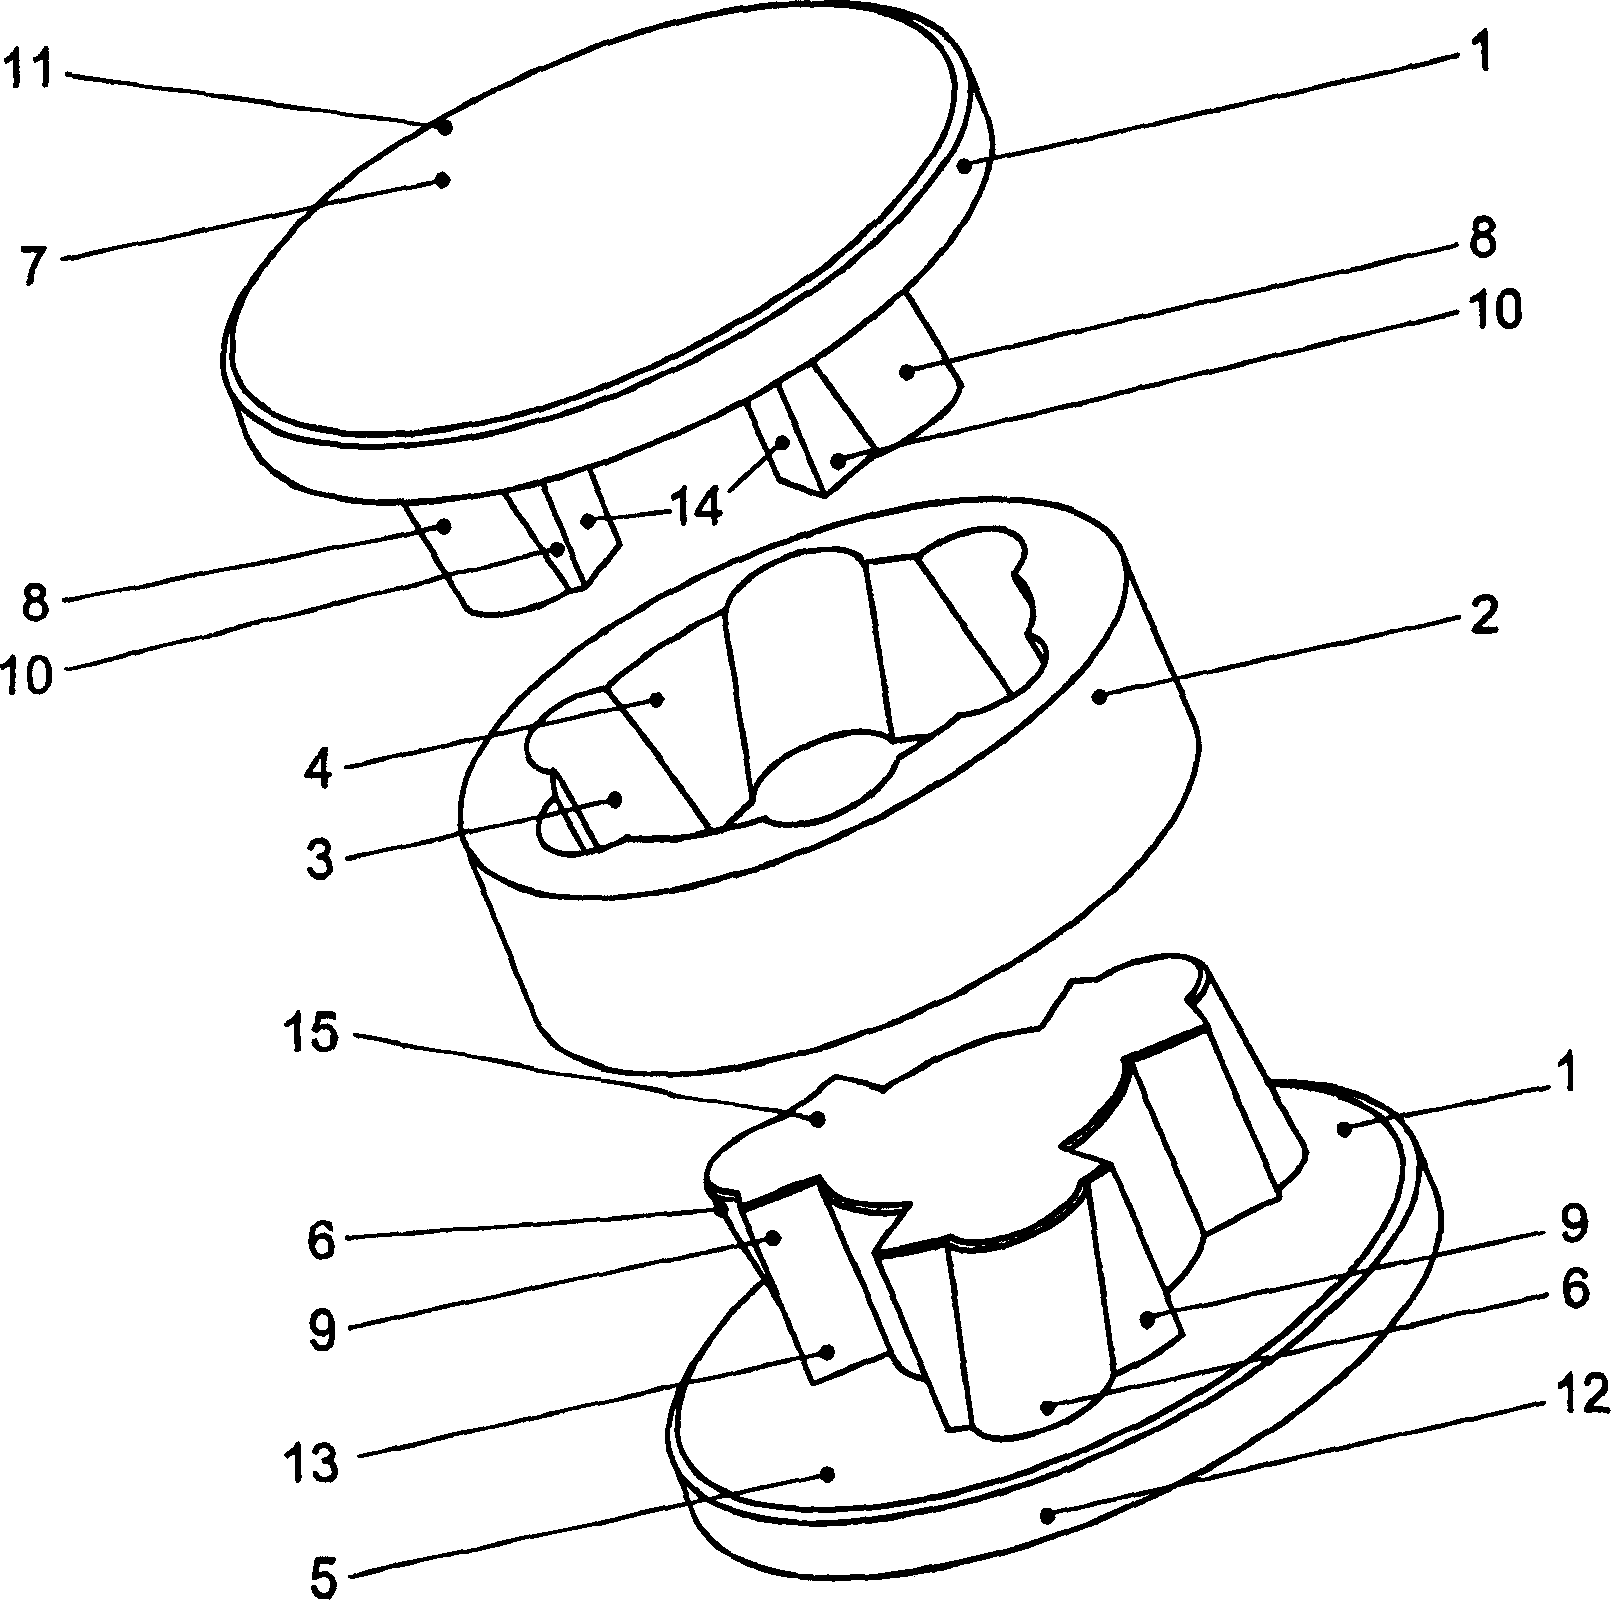 Apparatus and method for making spiral rollaway nest by pressure manufacturing or shaping